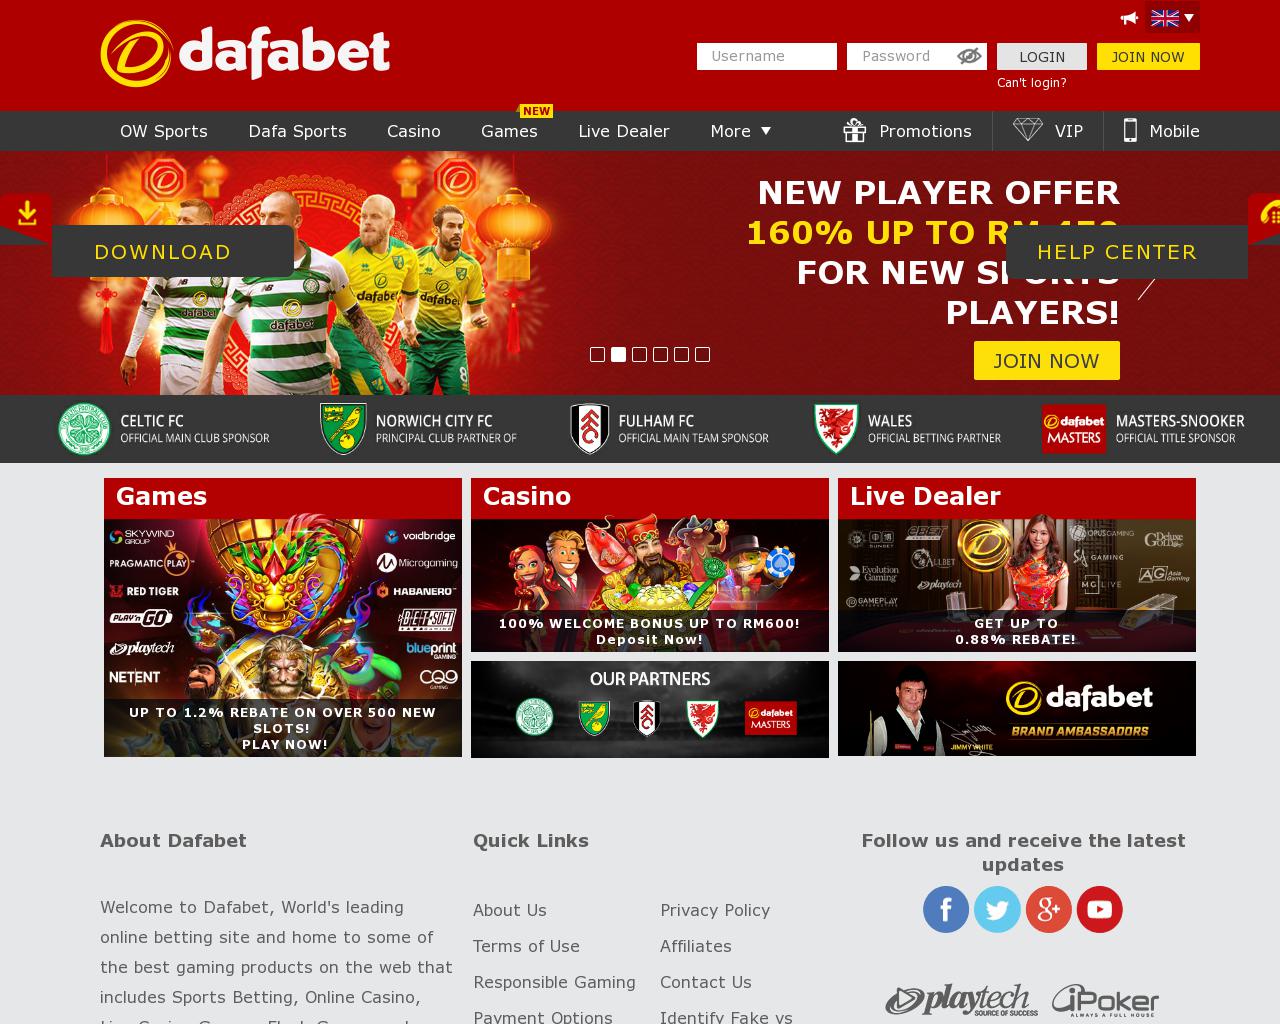 DAFABET IS THE MOST SECURE ONLINE BETTING SITE